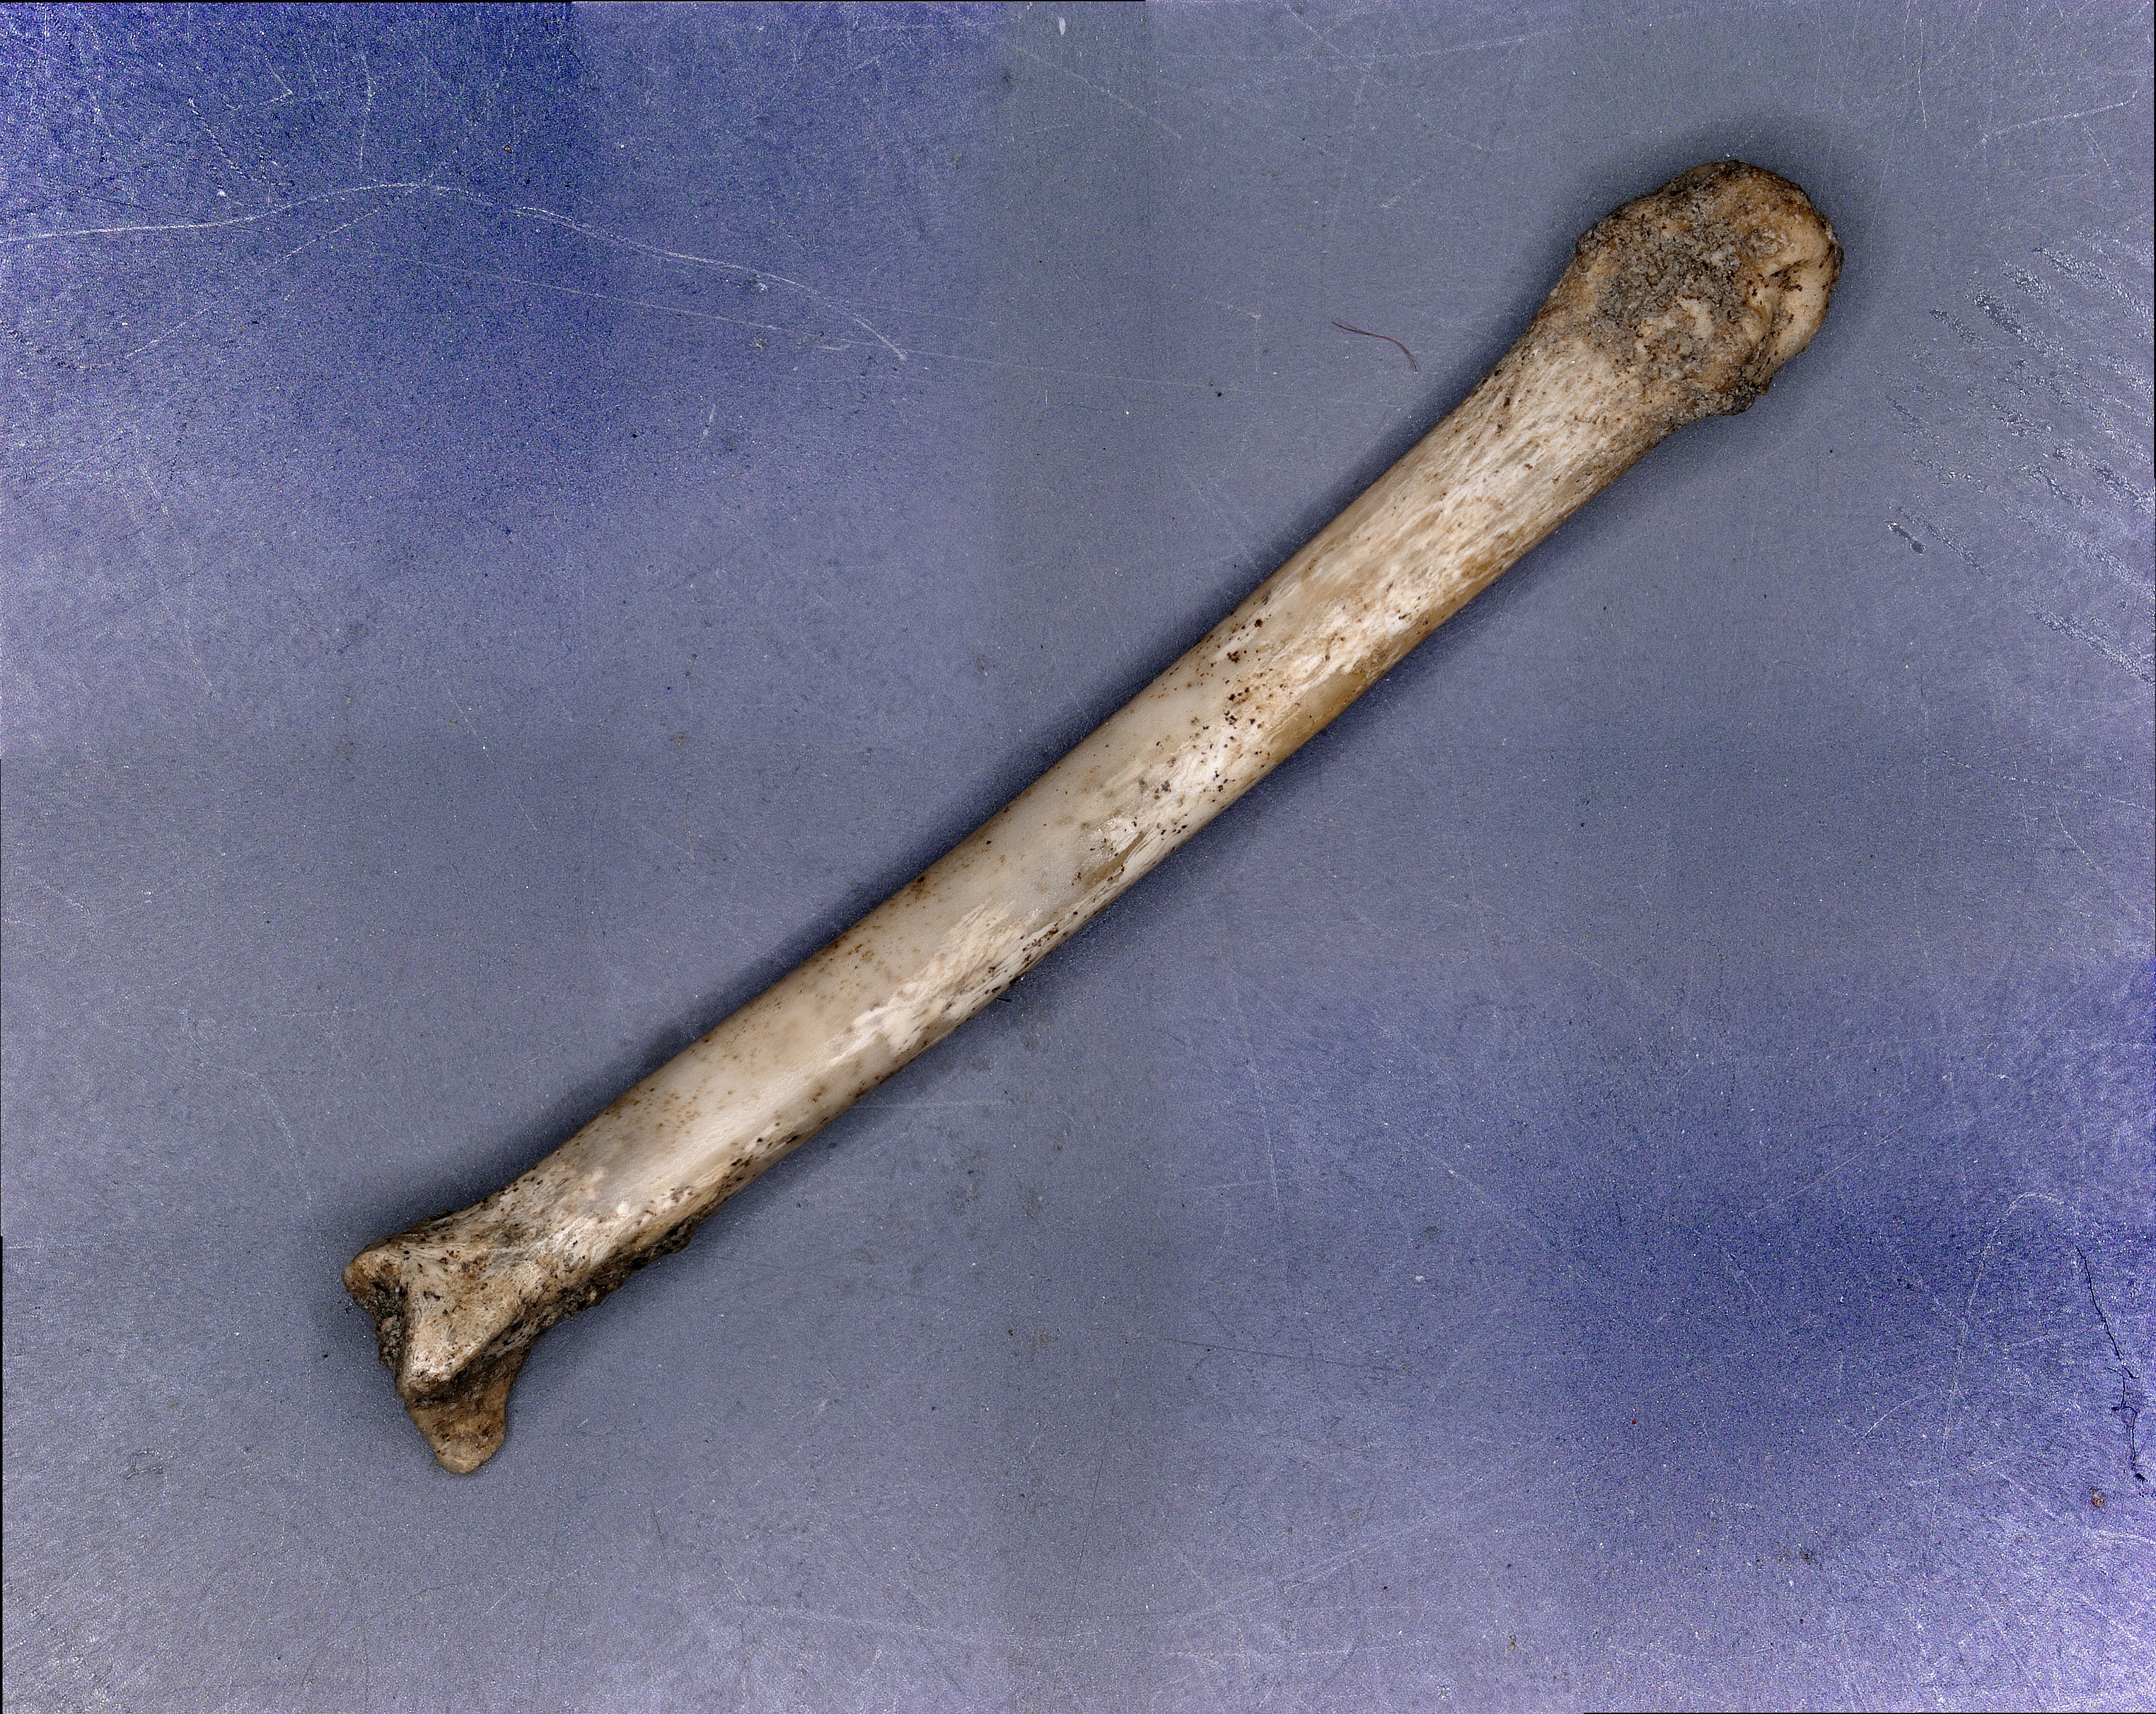 A squirrel bone found at one of the two archaeological sites in Winchester